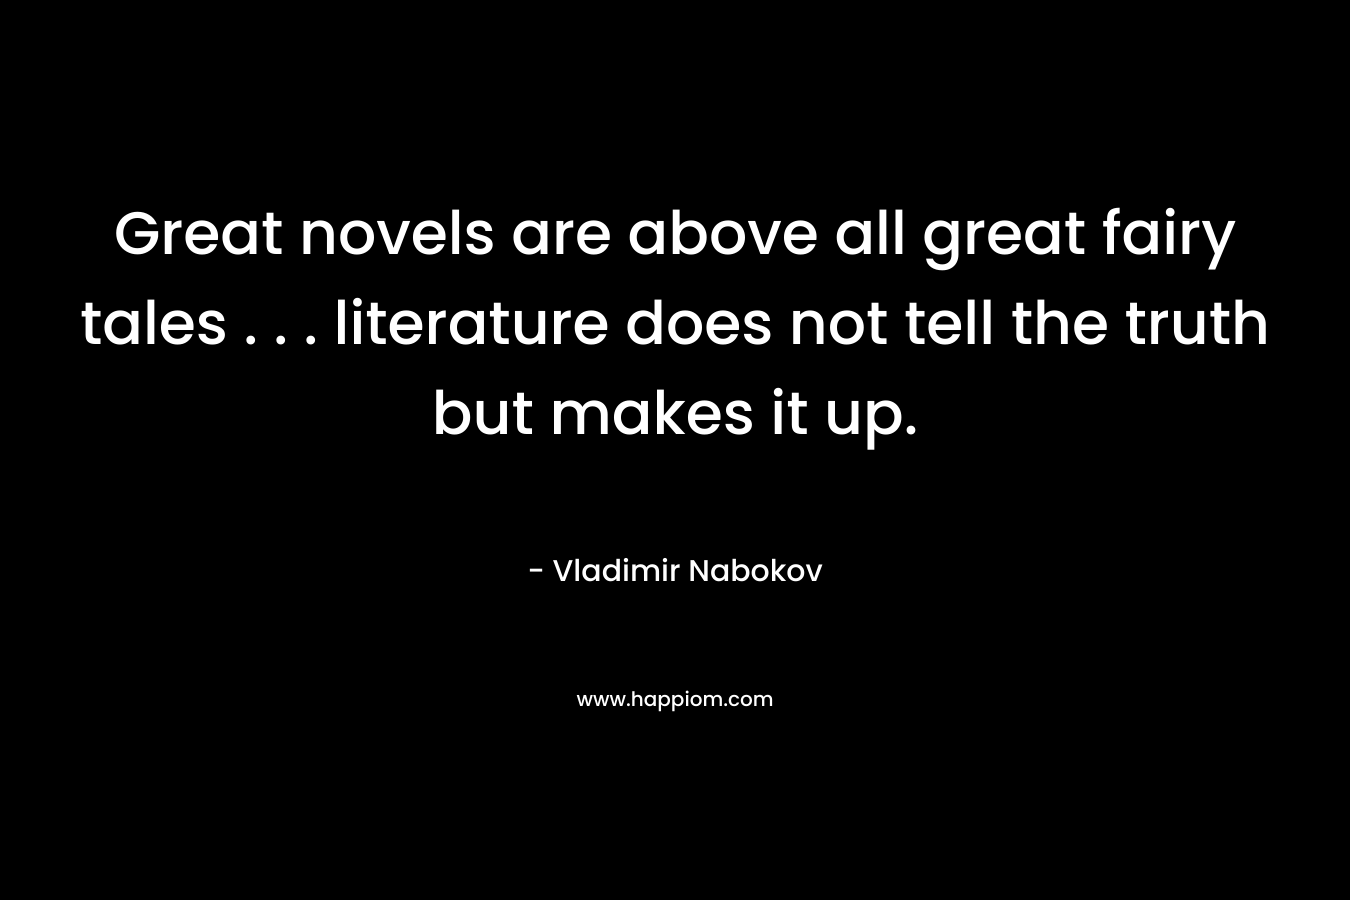 Great novels are above all great fairy tales . . . literature does not tell the truth but makes it up. – Vladimir Nabokov